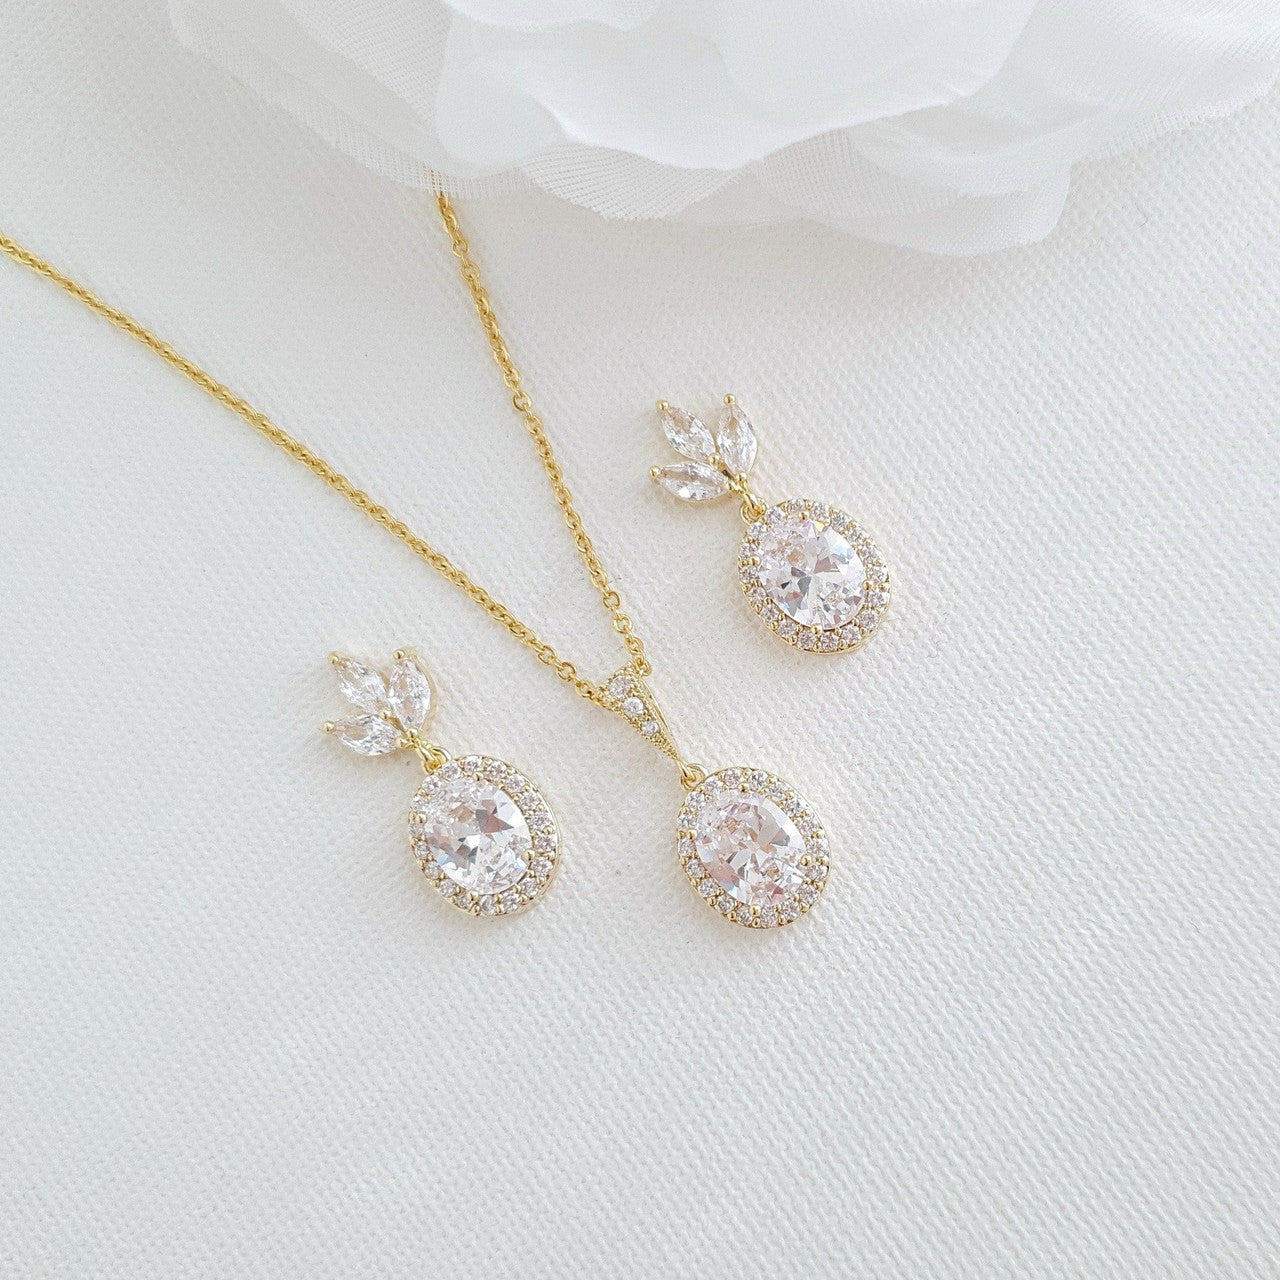 Small Earrings and Necklace Bridesmaid Jewelry Set- Emily